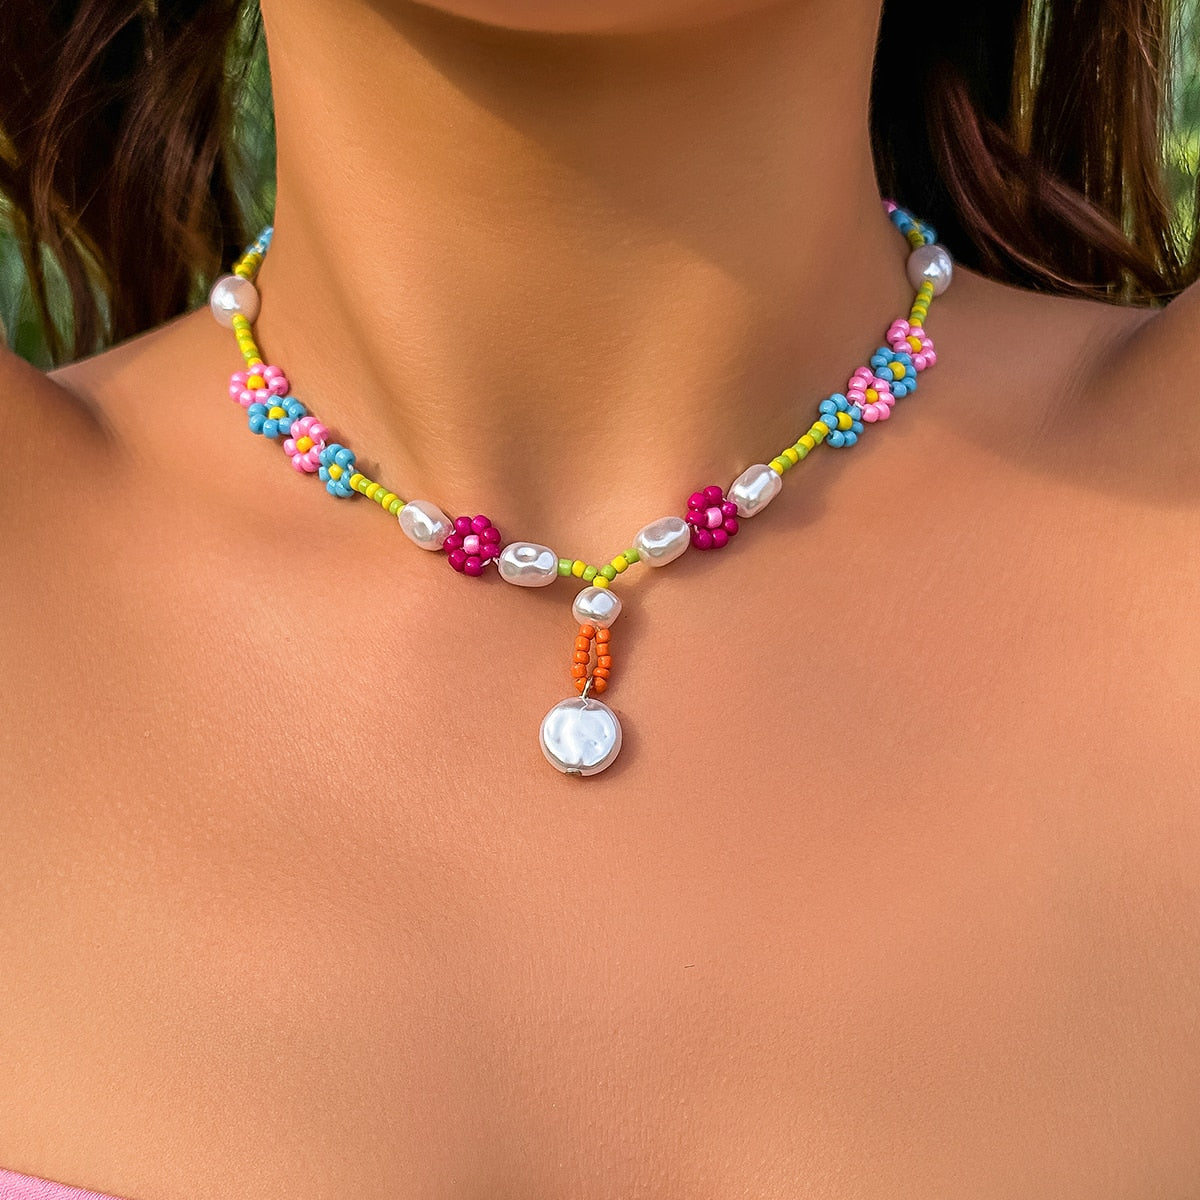 Maytrends Simulated Pearls Cute Flowers Colorful Hand-woven Beaded Short Clavicle Chain Choker Necklace For Women Girls Jewelry